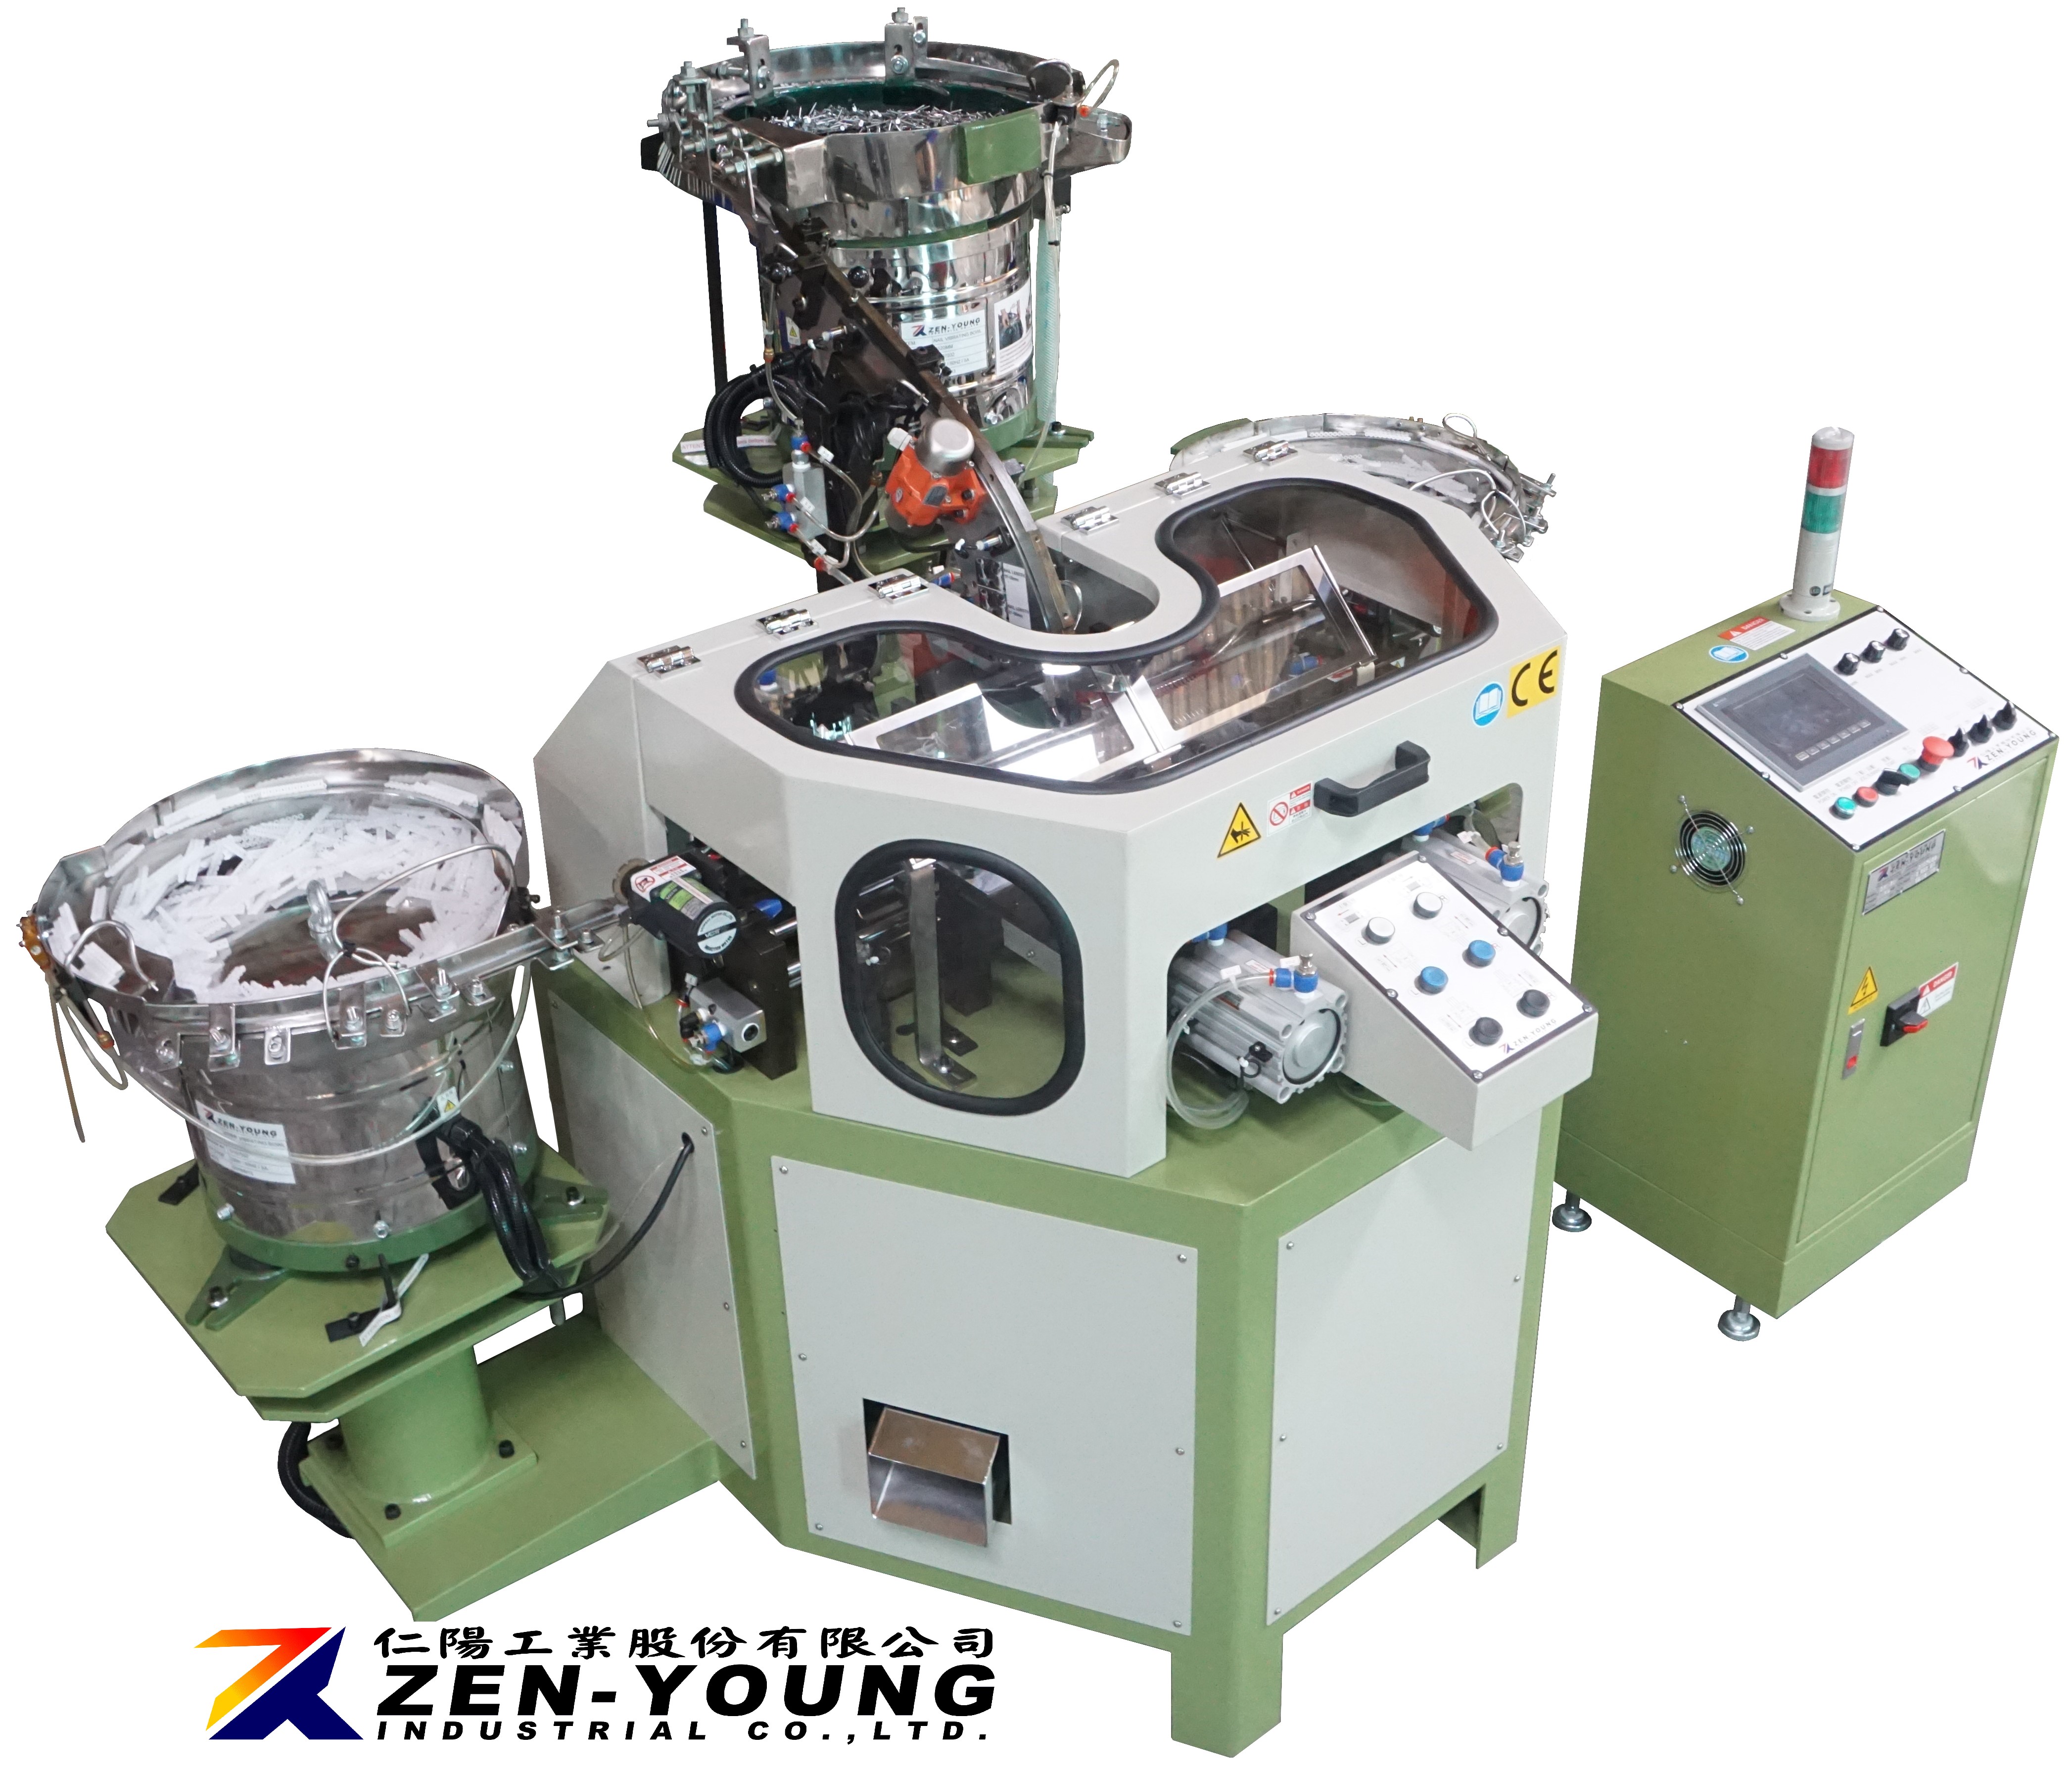 Collated Strip Pin Assembly Machine